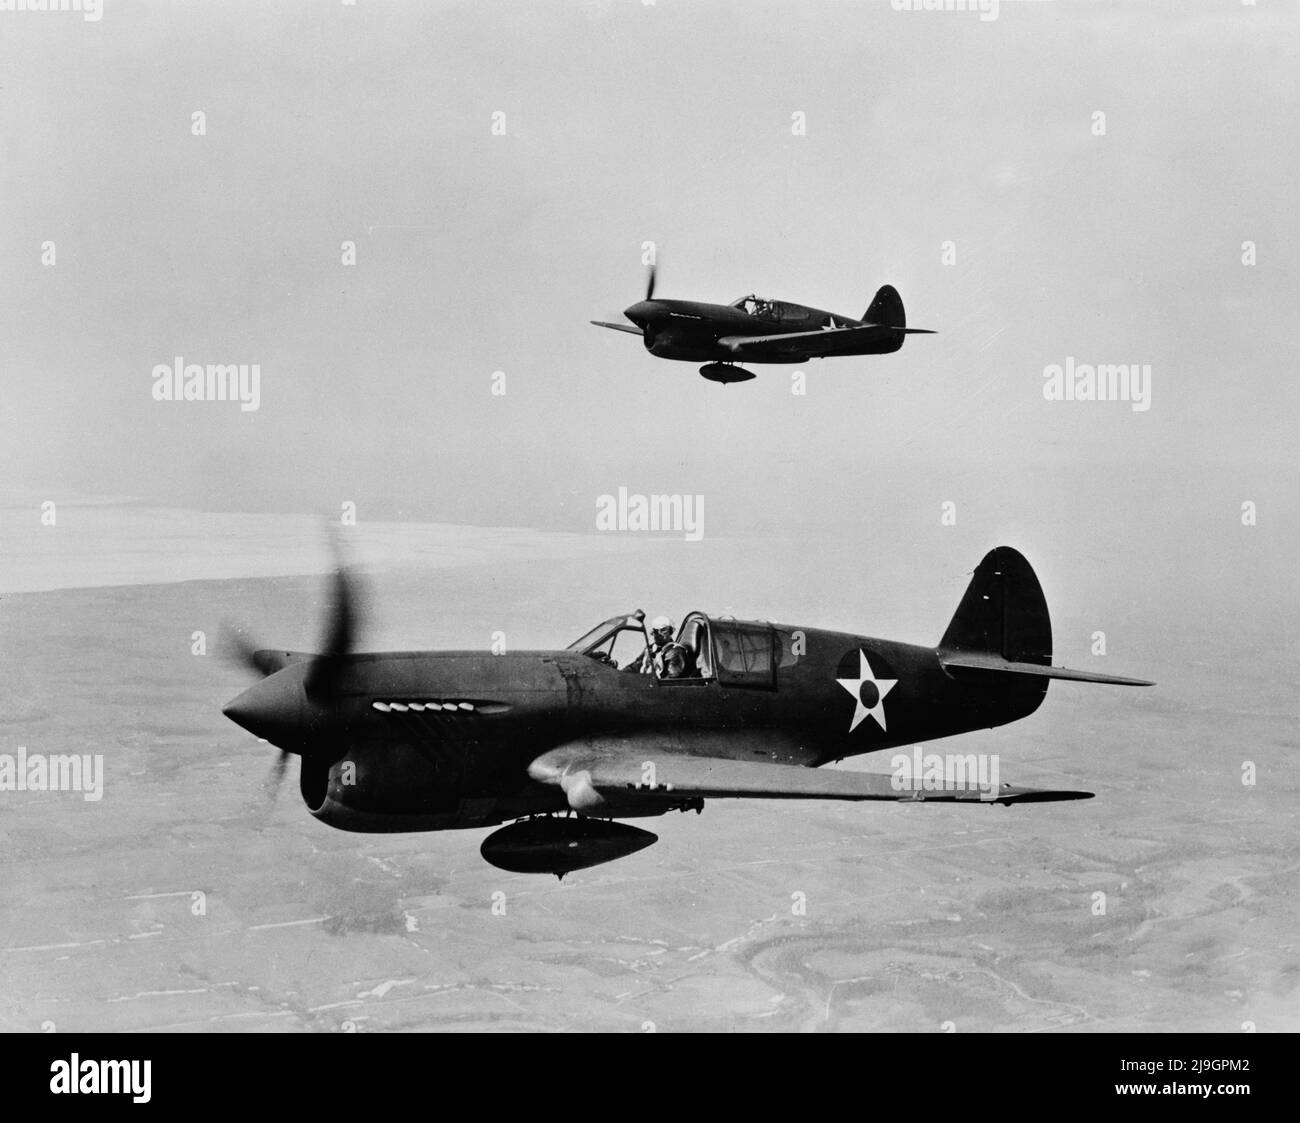 Vintage photo circa February 1943 of a pair of American P-40 single-engine fighter planes in flight. It served with the RAF (Royal Air Force) and with the AVG (American Volunteer Group or Flying Tigers) in China and with the US army air force in the Pacific Stock Photo